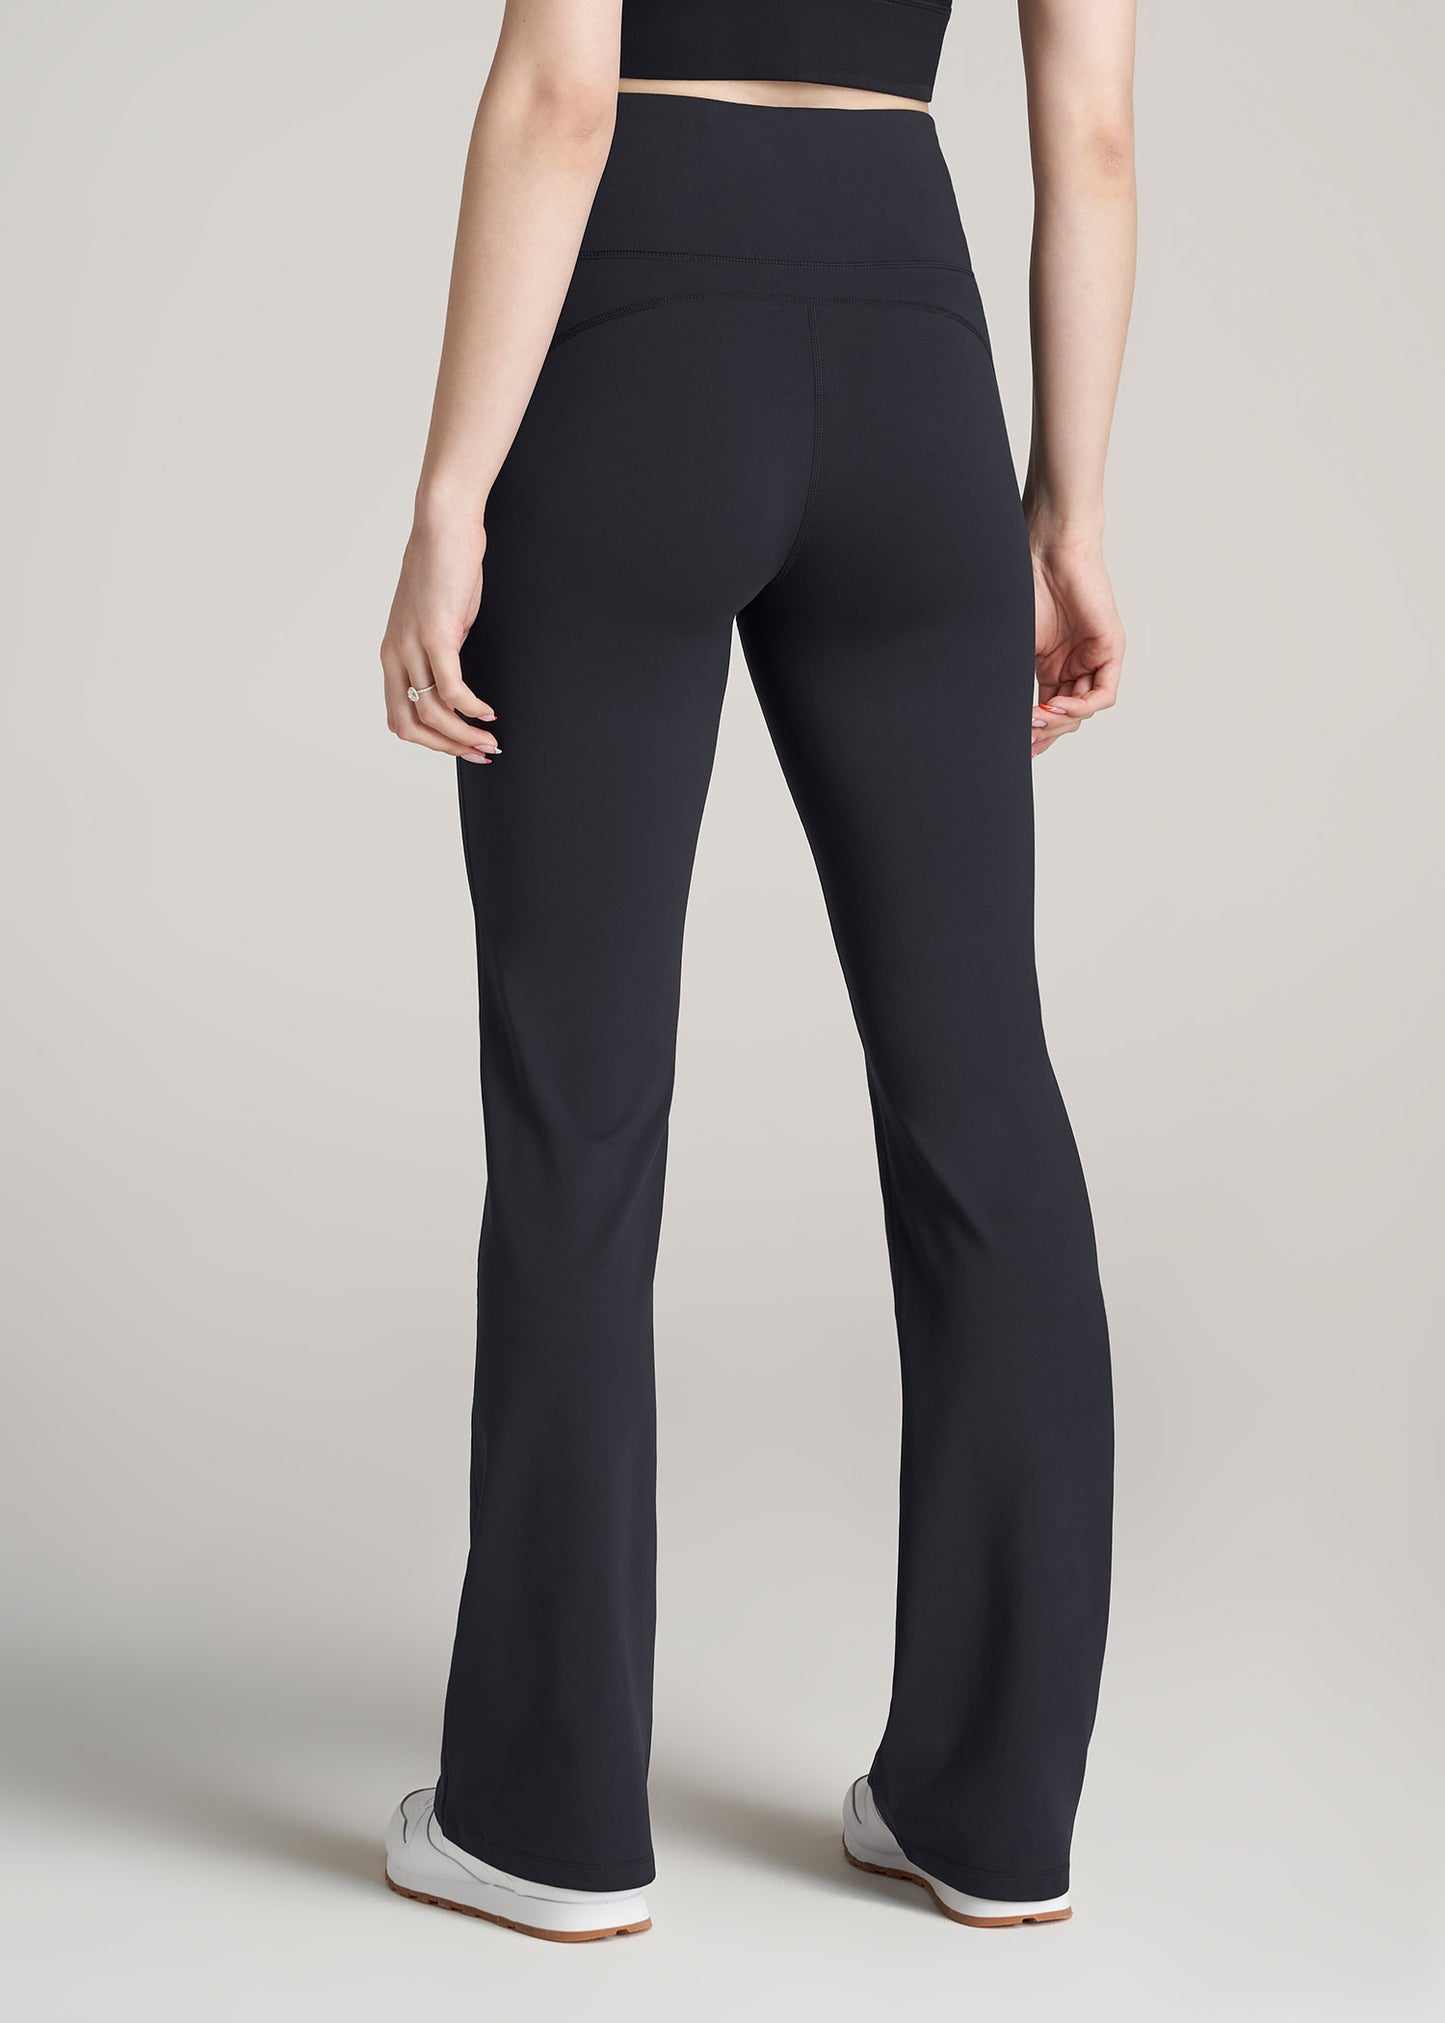 I posted yesterday about groove pants sizing and here are sizes 6